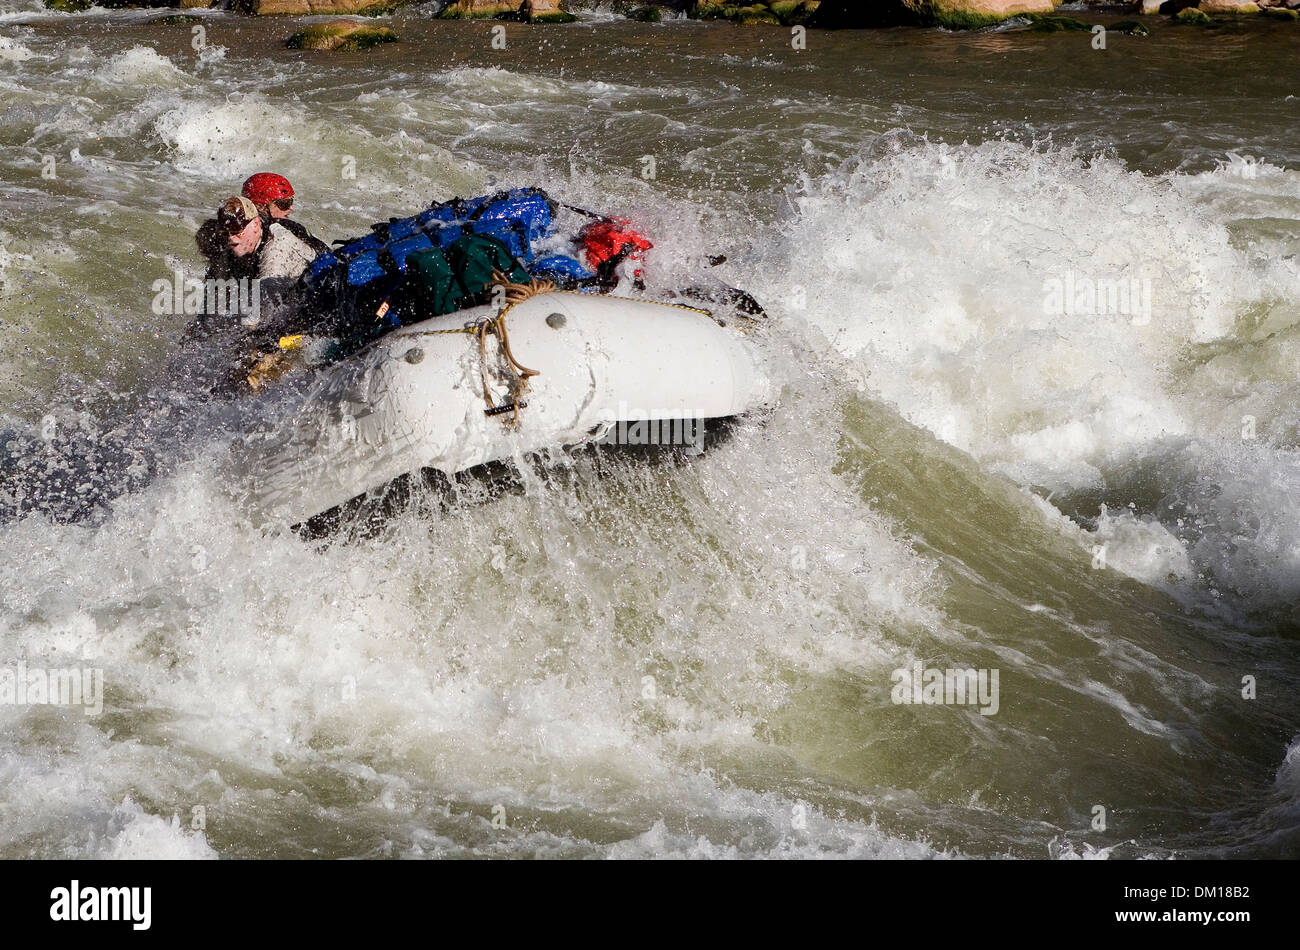 Rafting through white water rapids in the Grand Canyon. Stock Photo